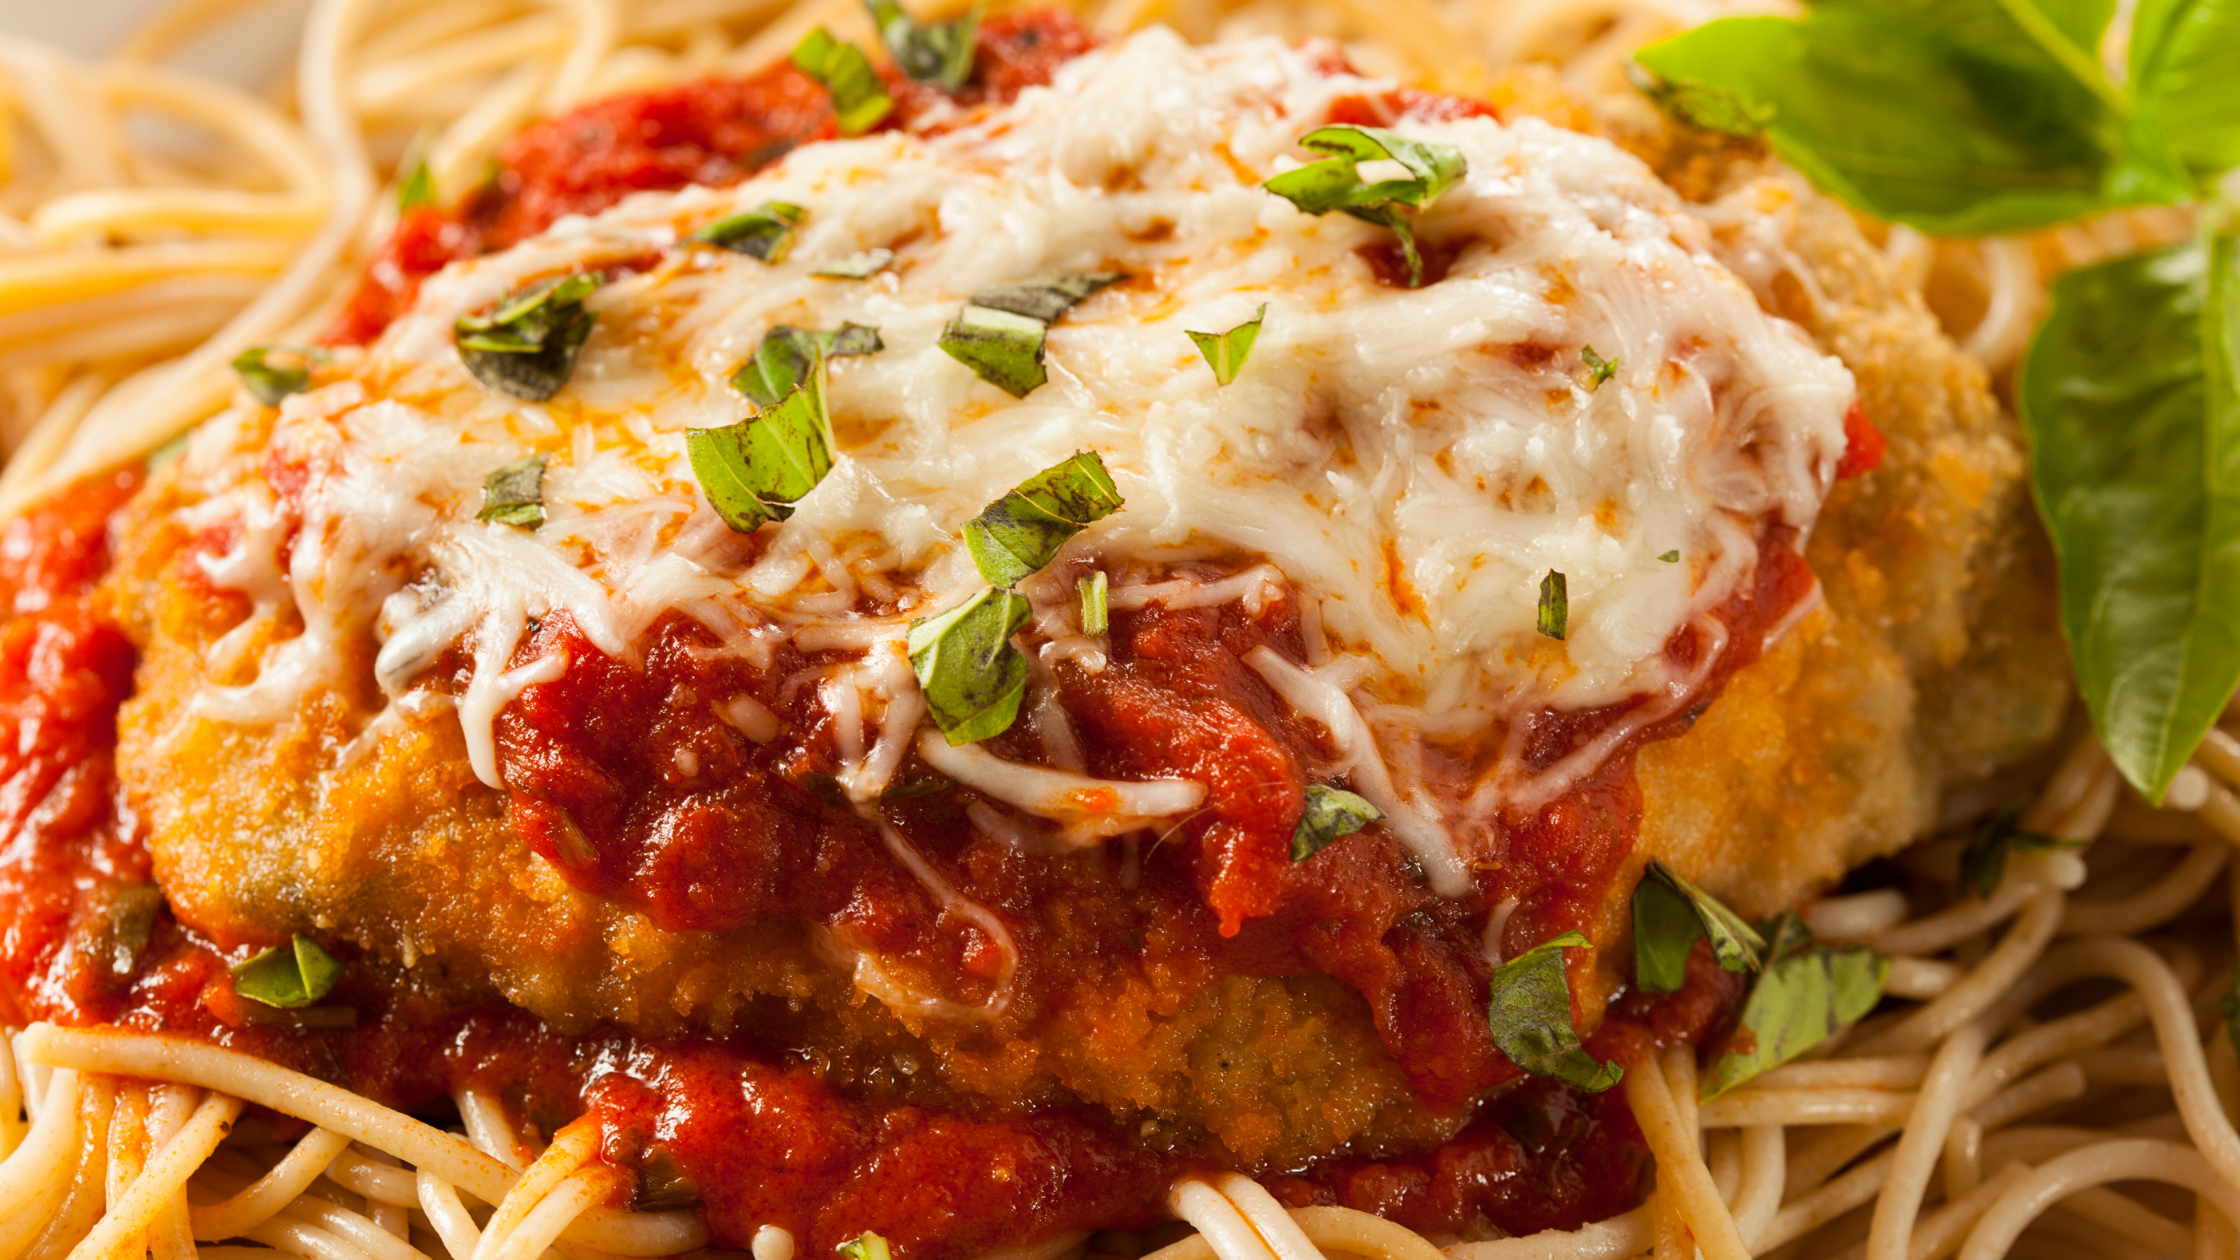 Low Calorie Chicken Parmesan with Whole Grain Spaghetti: A Healthy Recipe for Delicious Italian Food 8